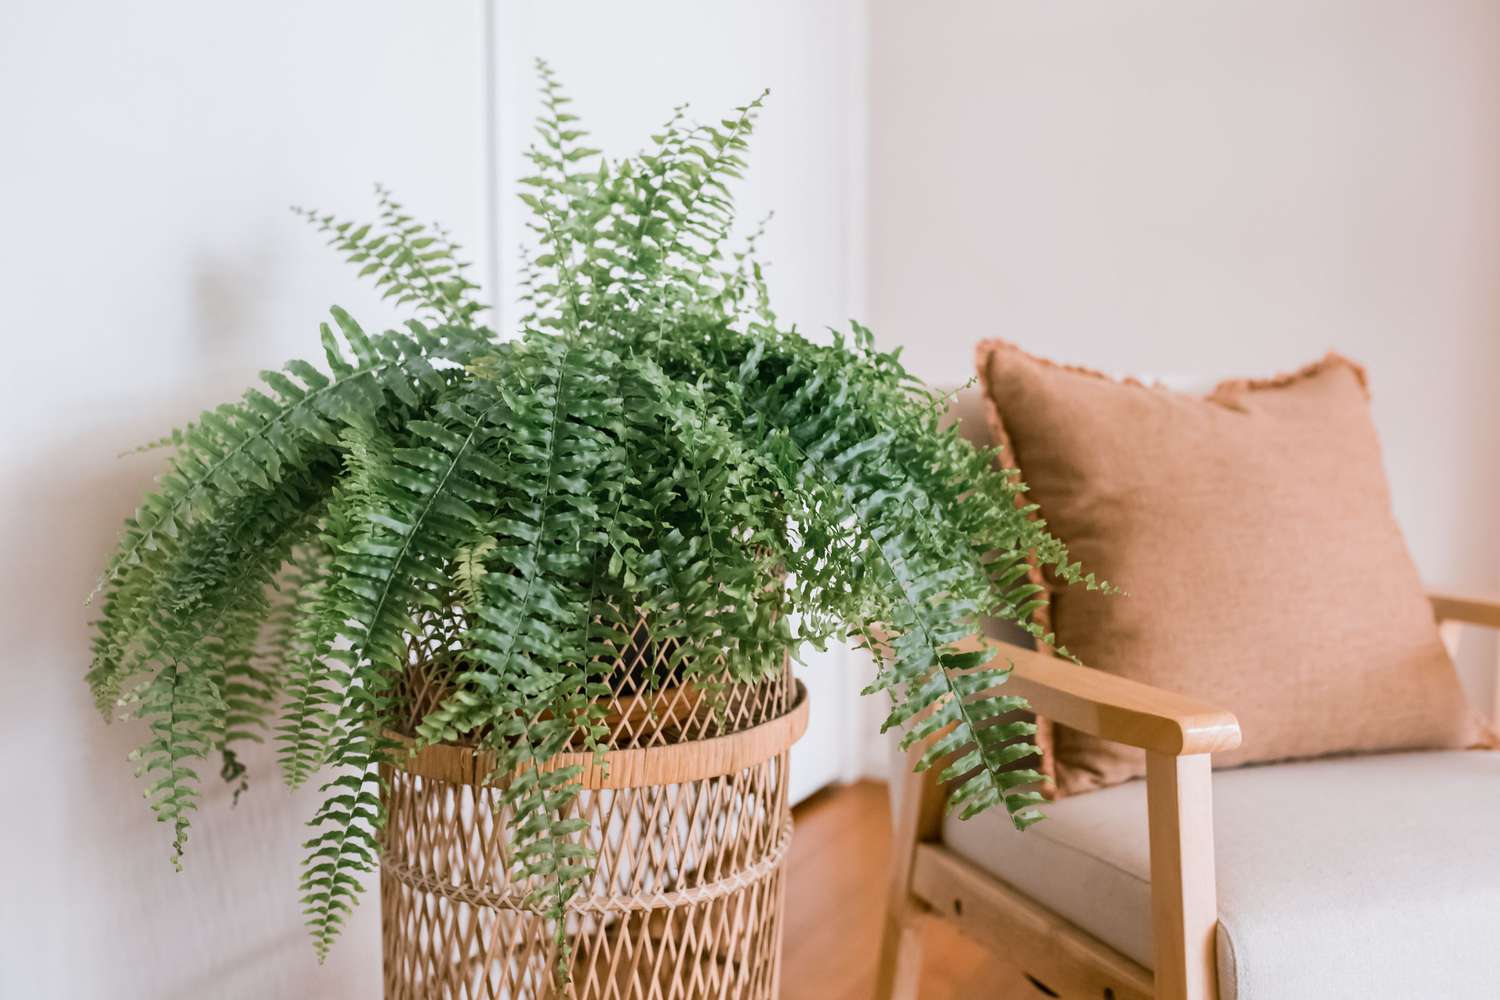 Boston fern plant with sword-shaped, blue-green fronds growing from wicker plant stand